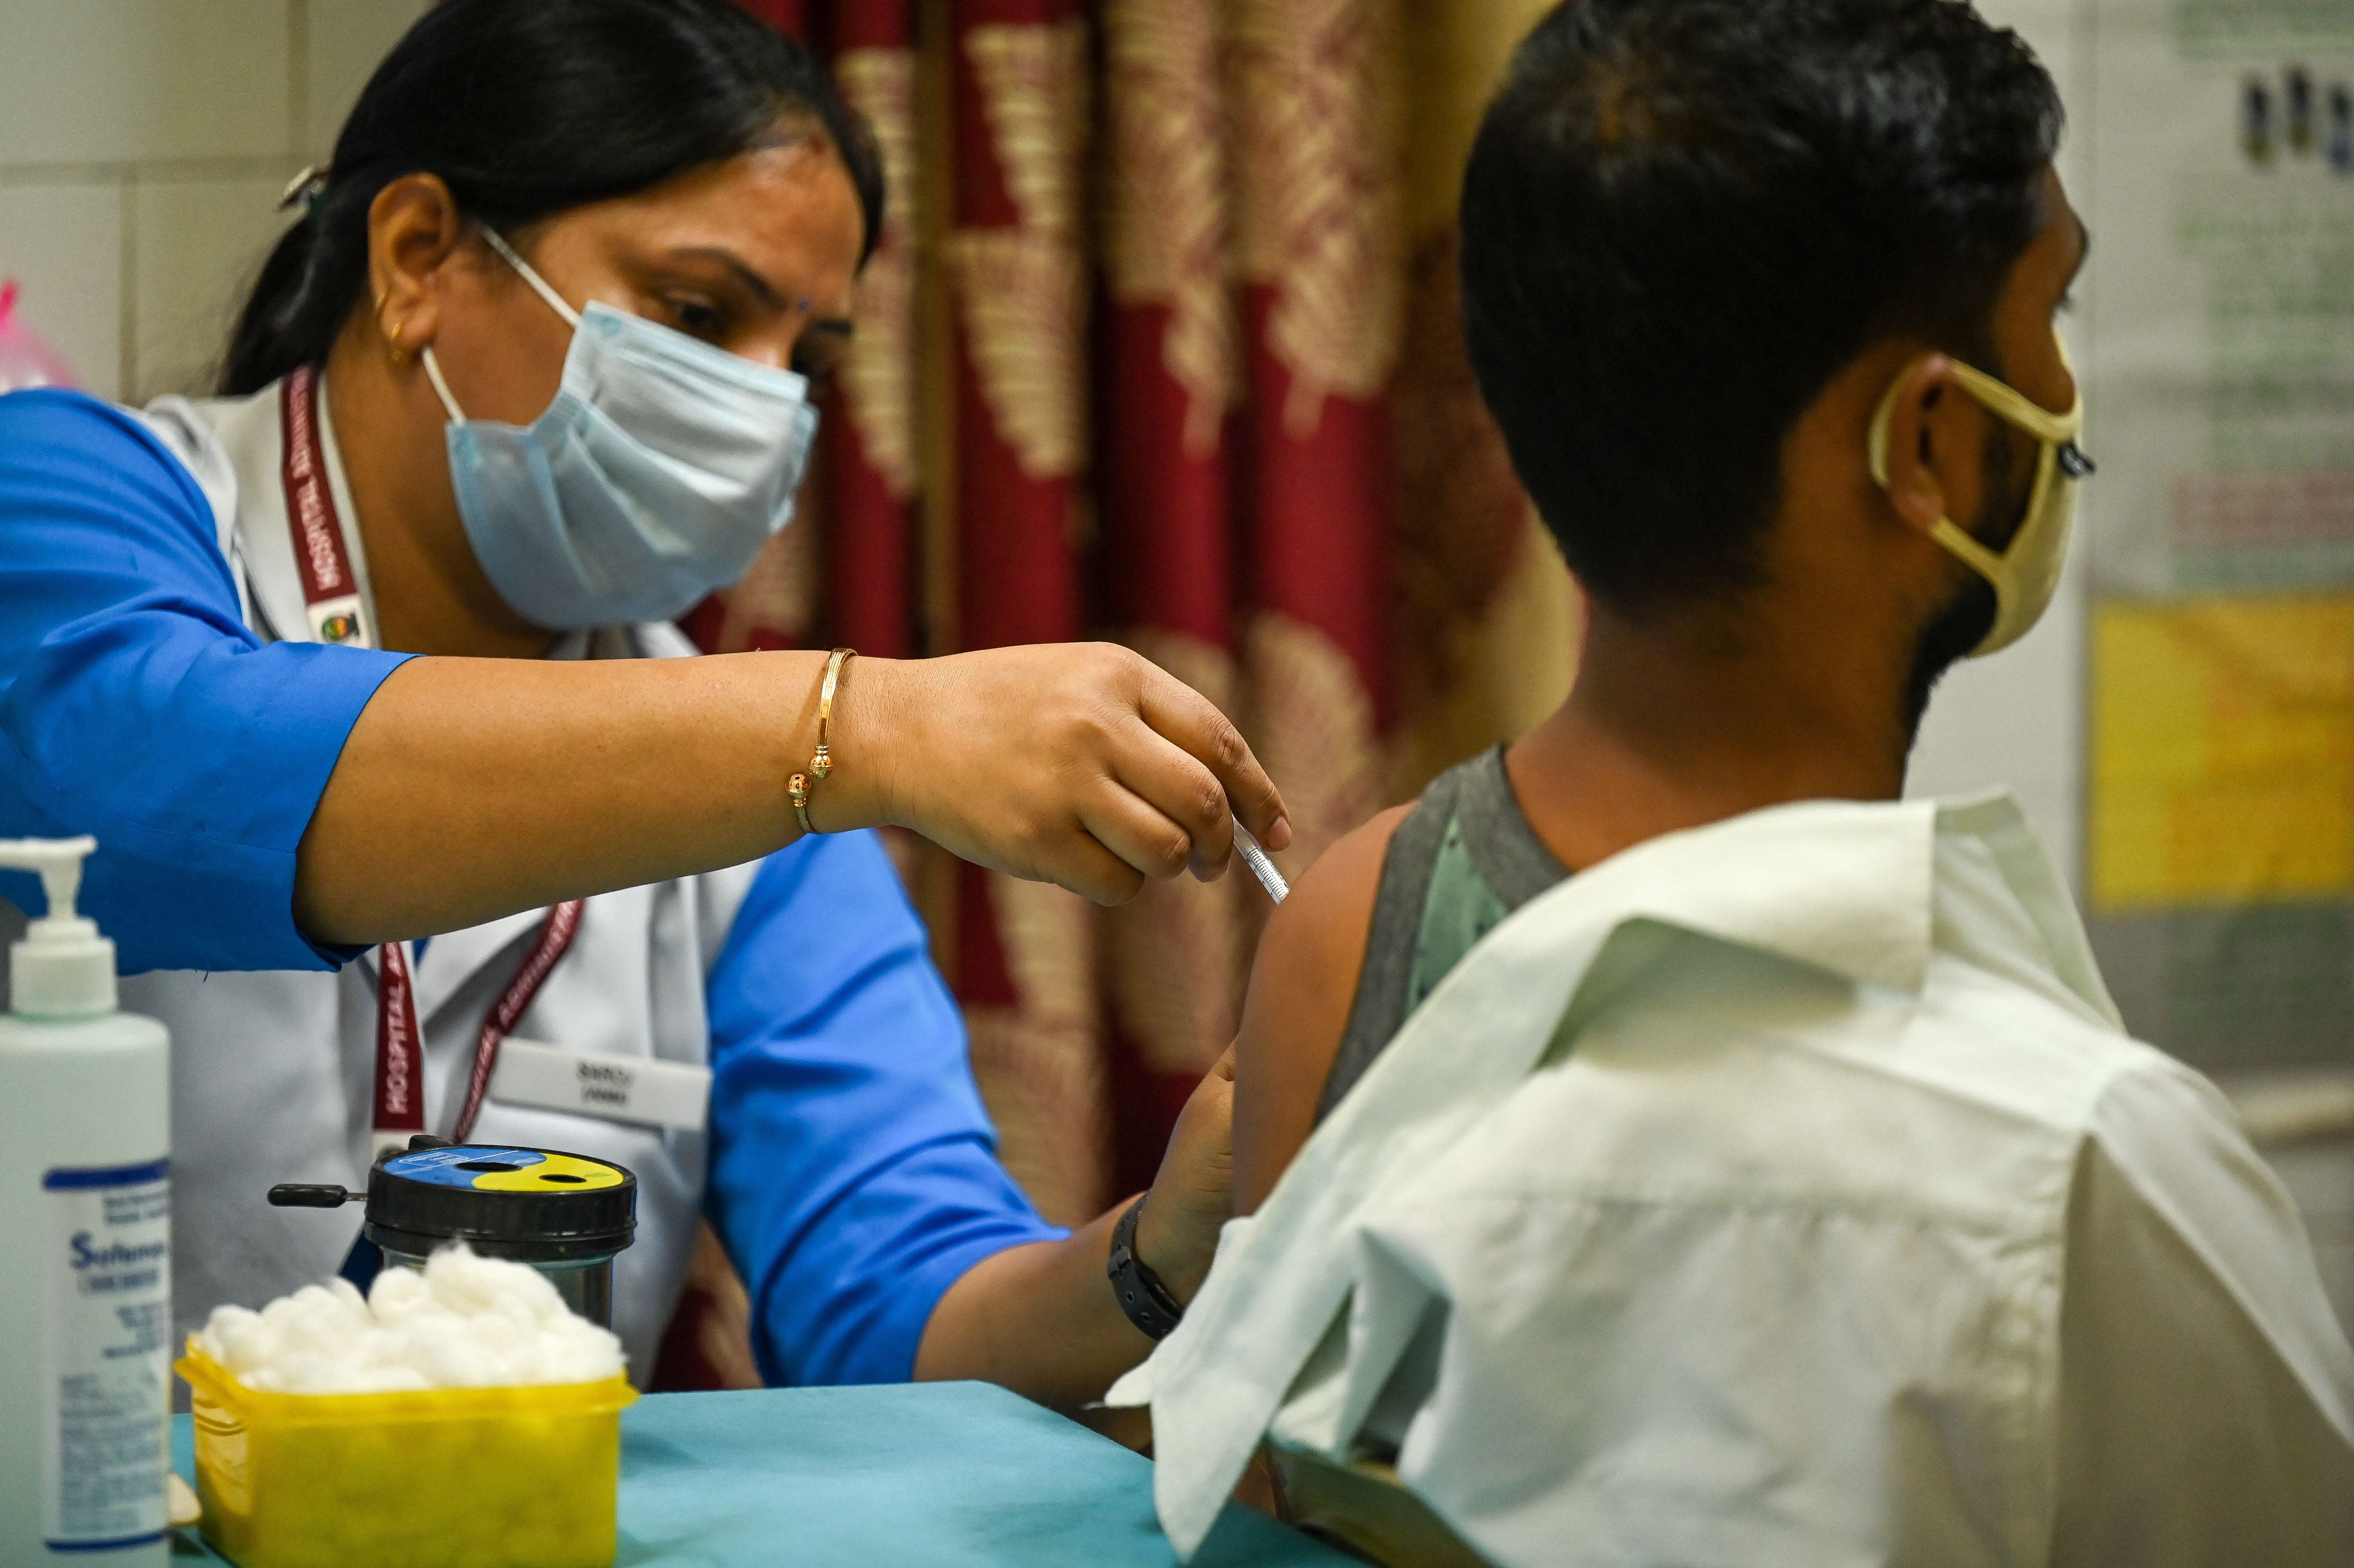 A health worker inoculates a man with a dose of the Covaxin vaccine in New Delhi on 21 October